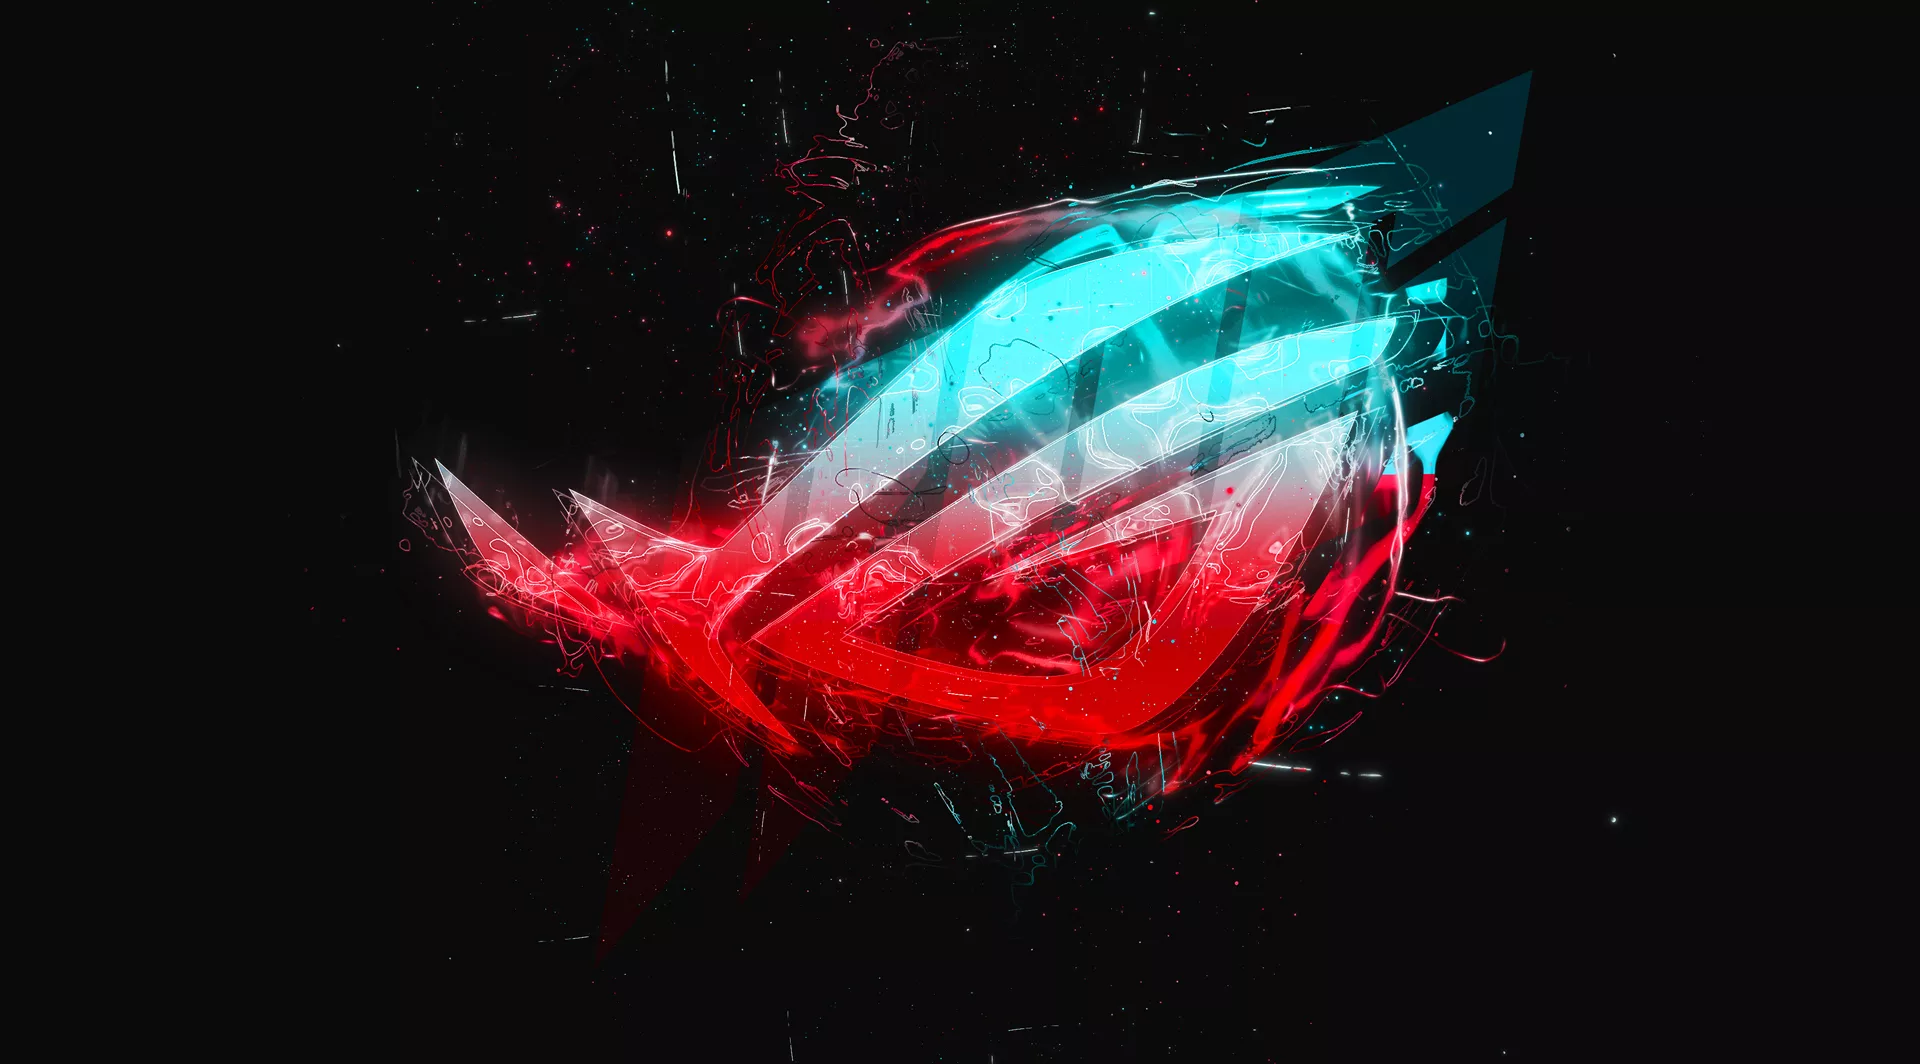 ROG wallpaper 2015 - the latest version of ROG wallpaper 2015 is (1920x1200) resolution and released on 2015-07-29. Please check above to find the newest version of ROG wallpaper 2015. - Gaming